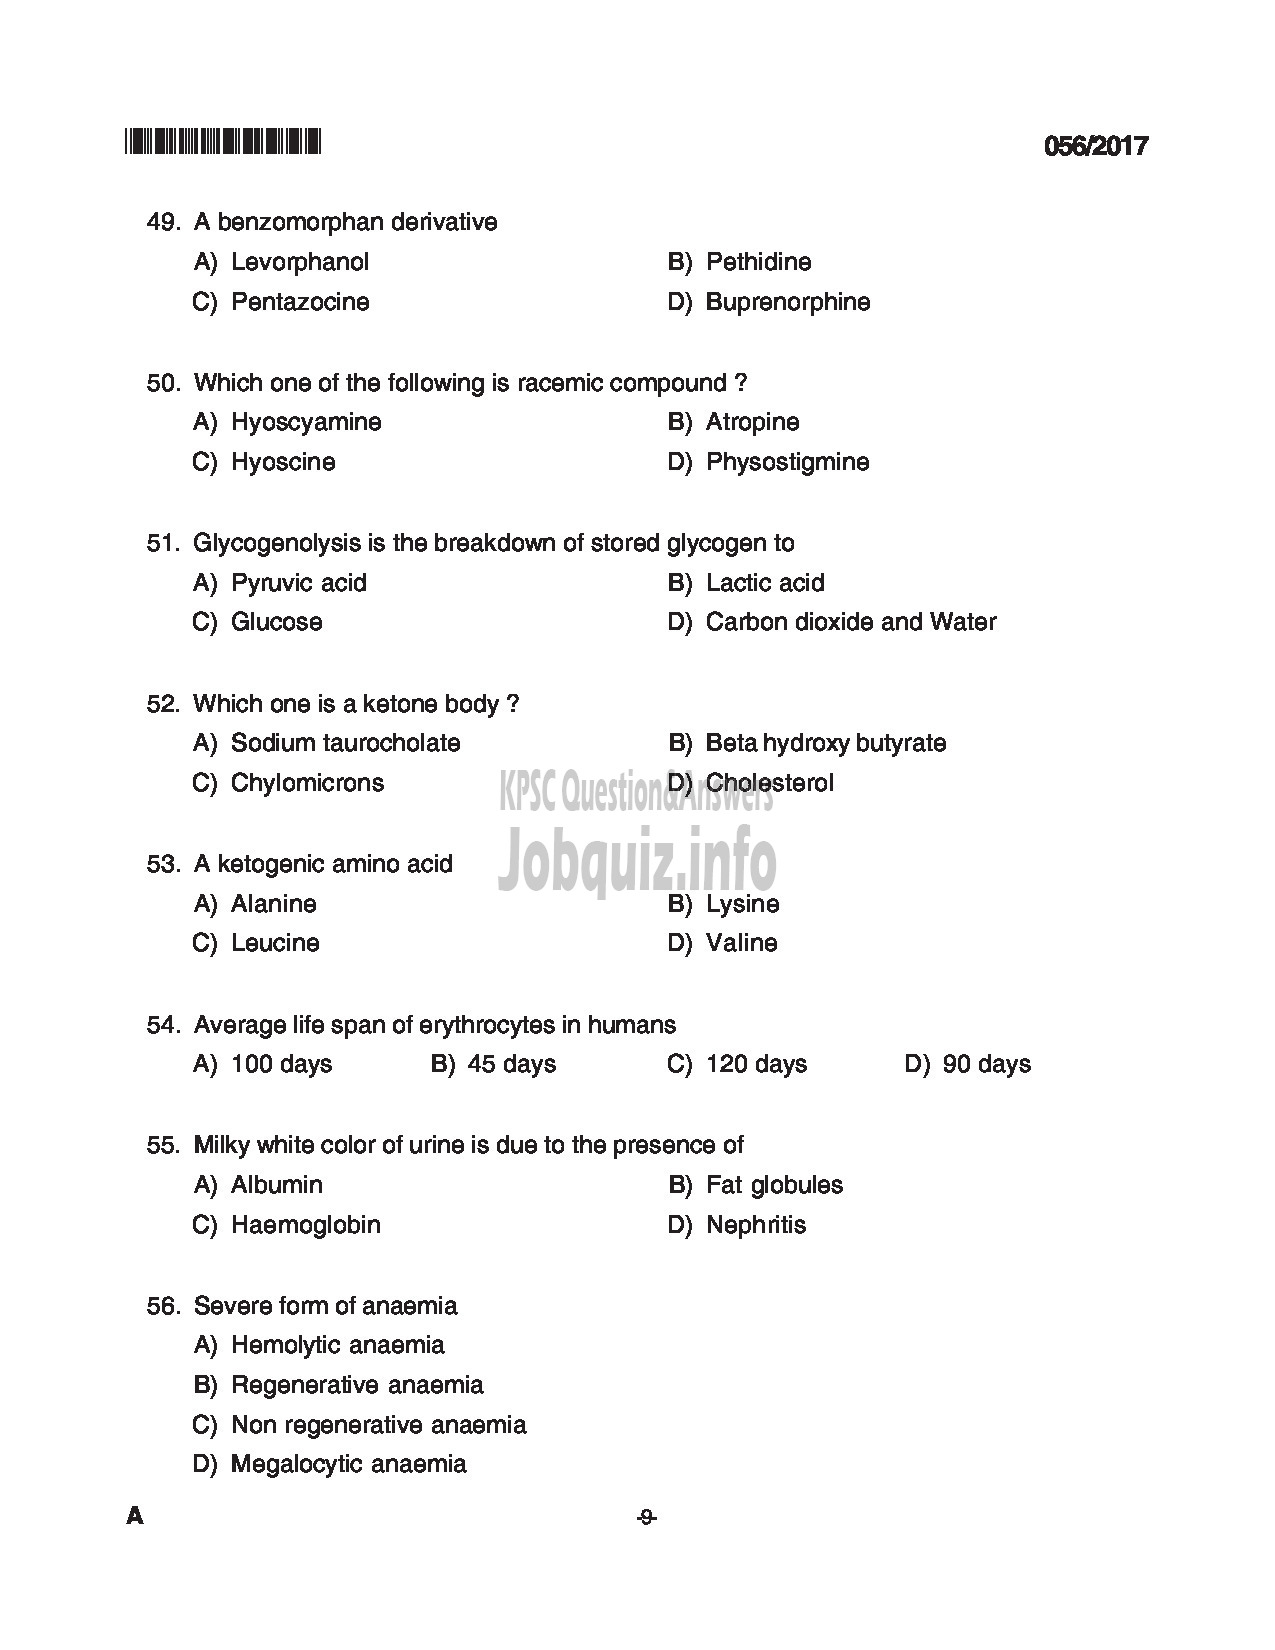 Kerala PSC Question Paper - PHARMACIST GRADE II INSURANCE MEDICAL SERVICES QUESTION PAPER-9